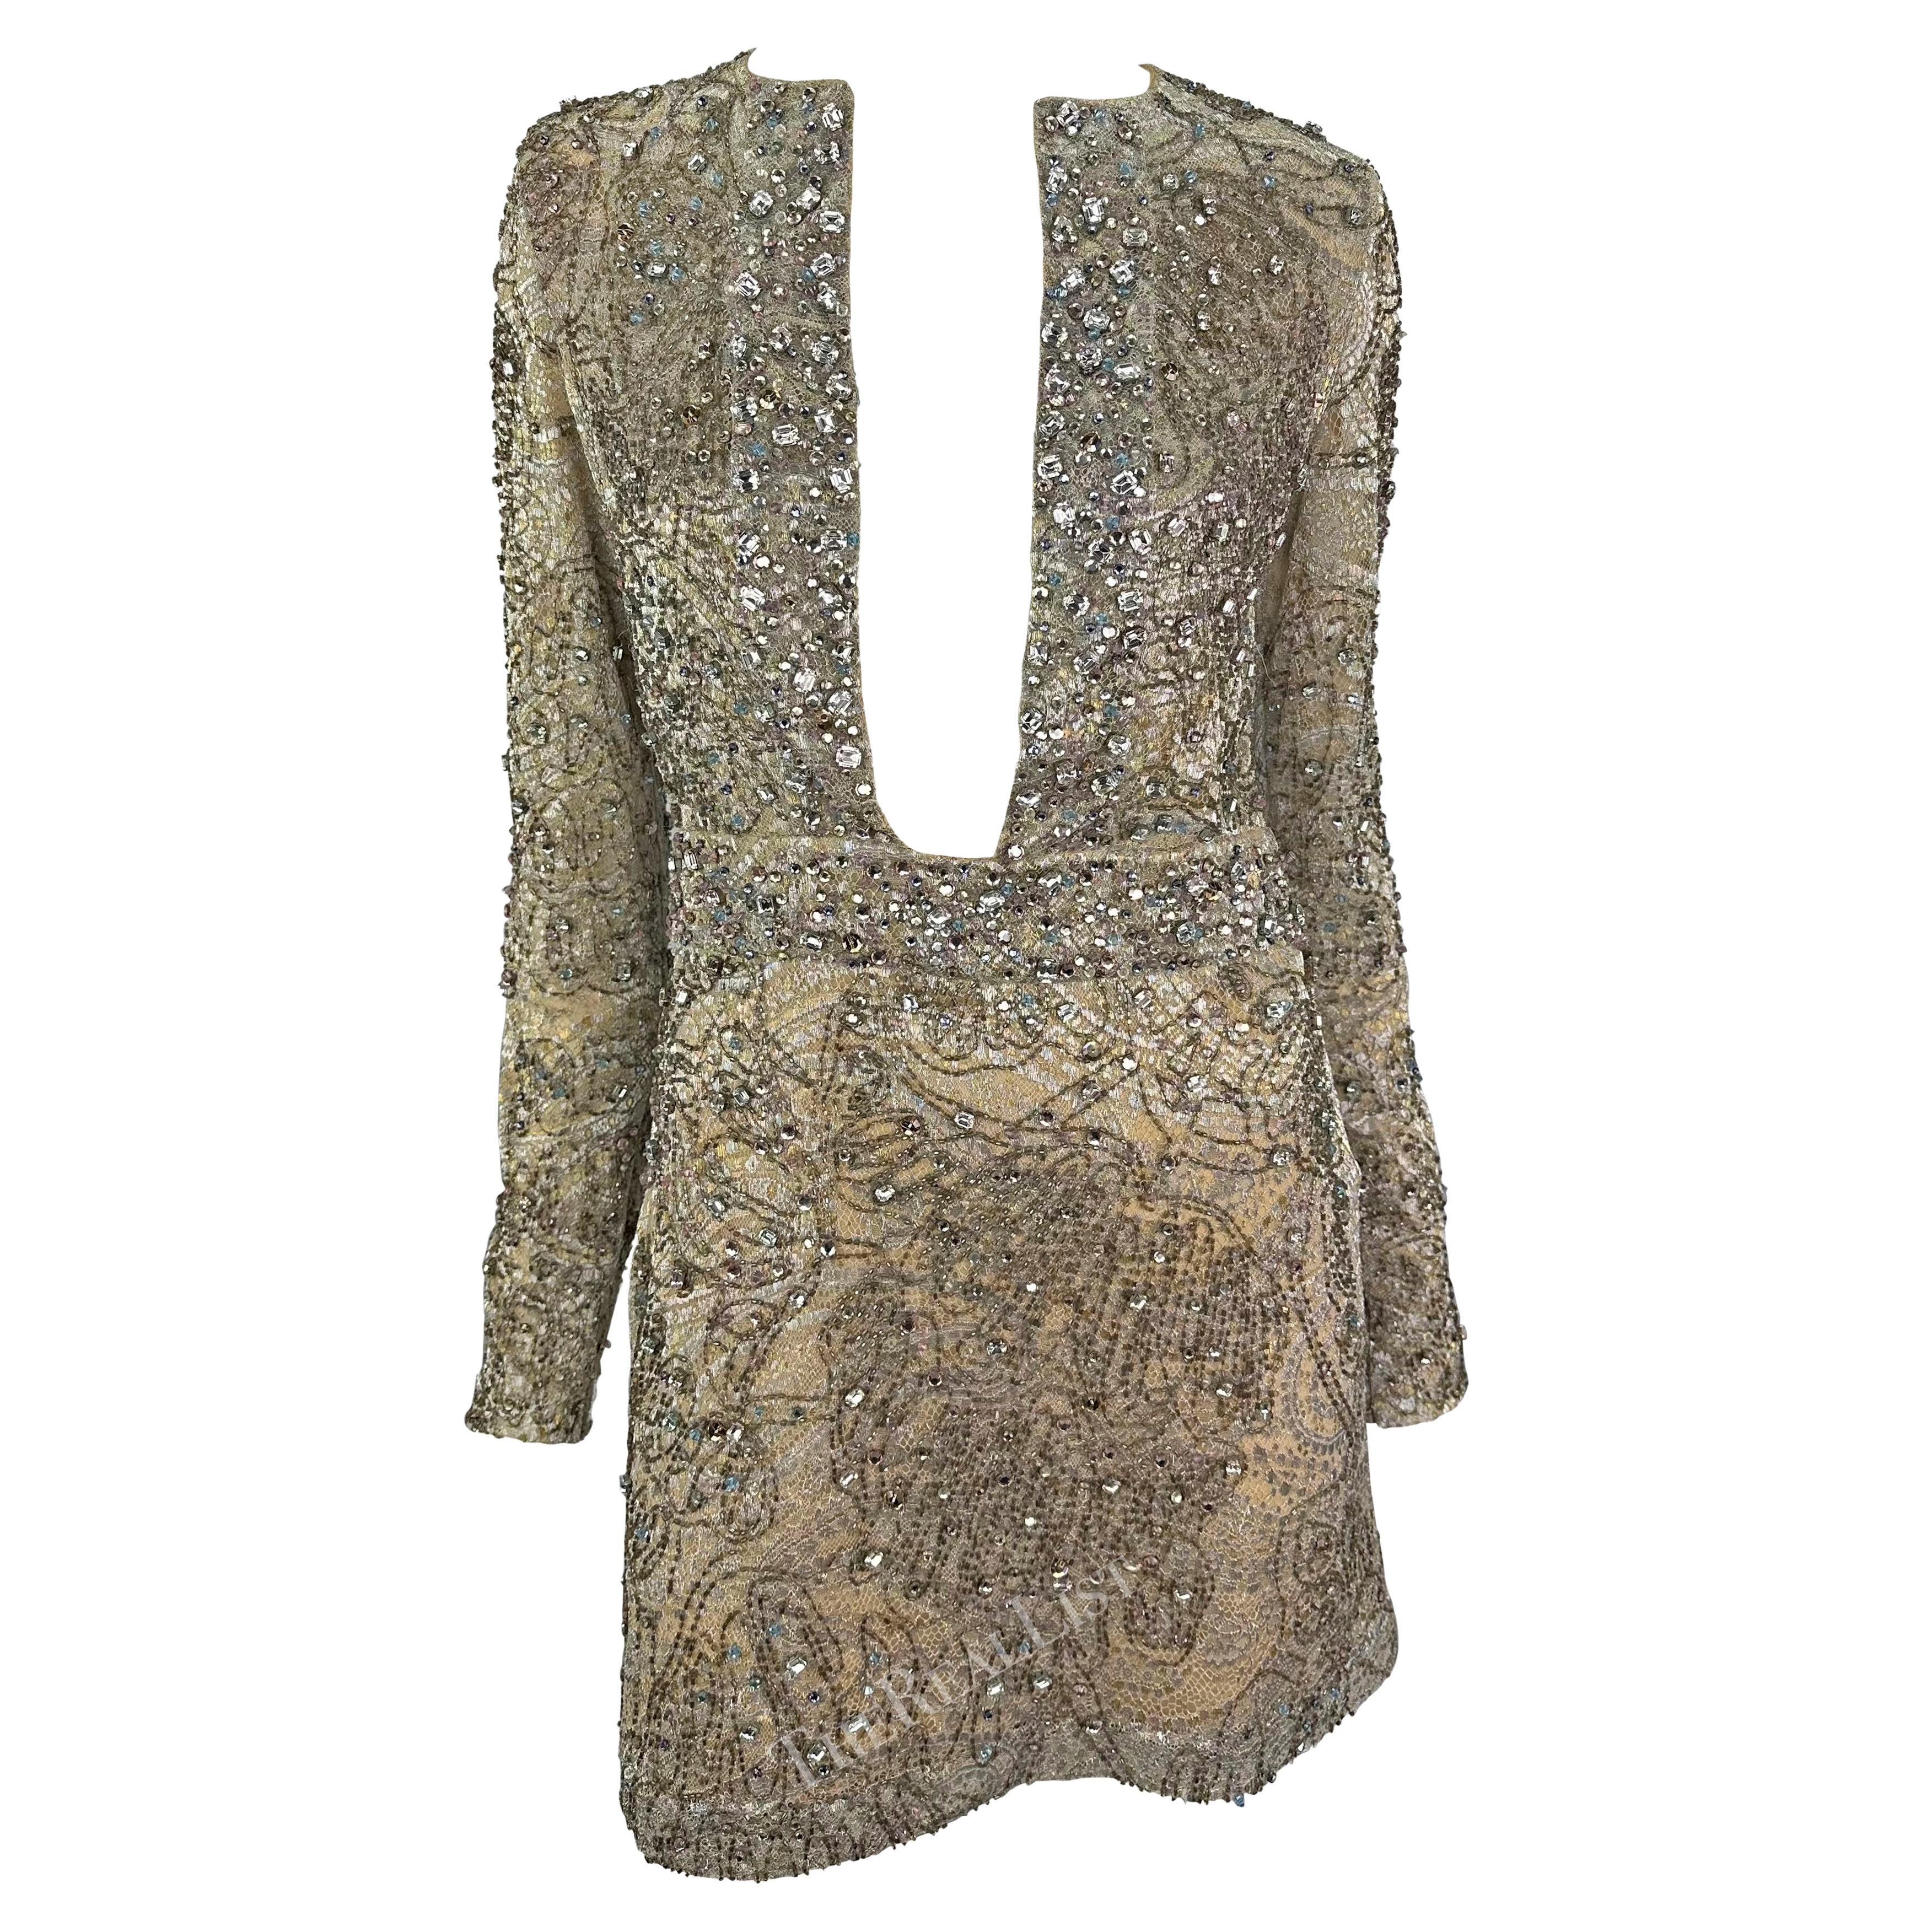 F/W 2000 Gucci by Tom Ford Rhinestone Beaded Plunge Silver Beige Lace Mini Dress For Sale